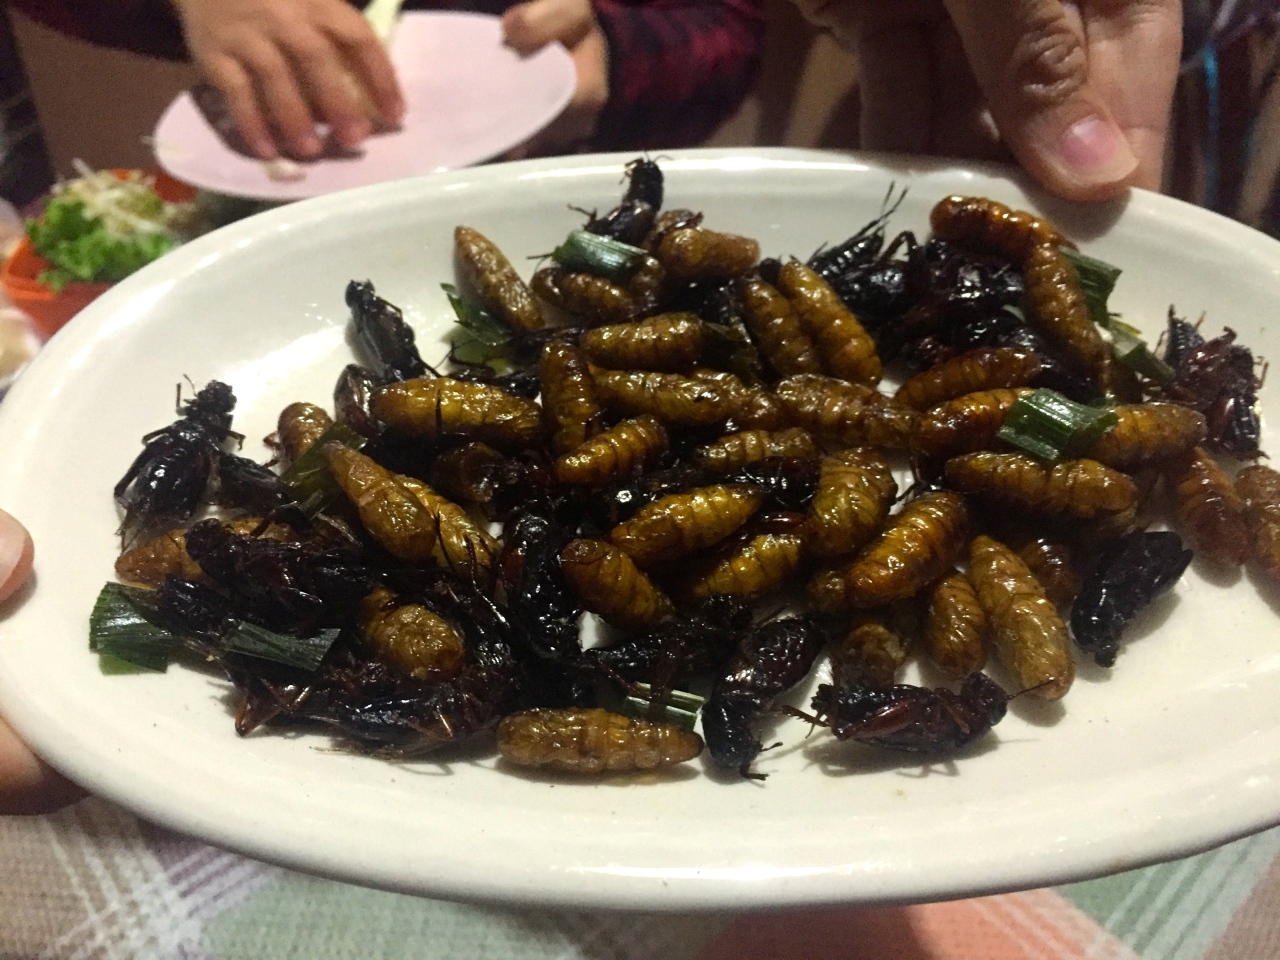 Crickets and silkworms for dinner in Phan